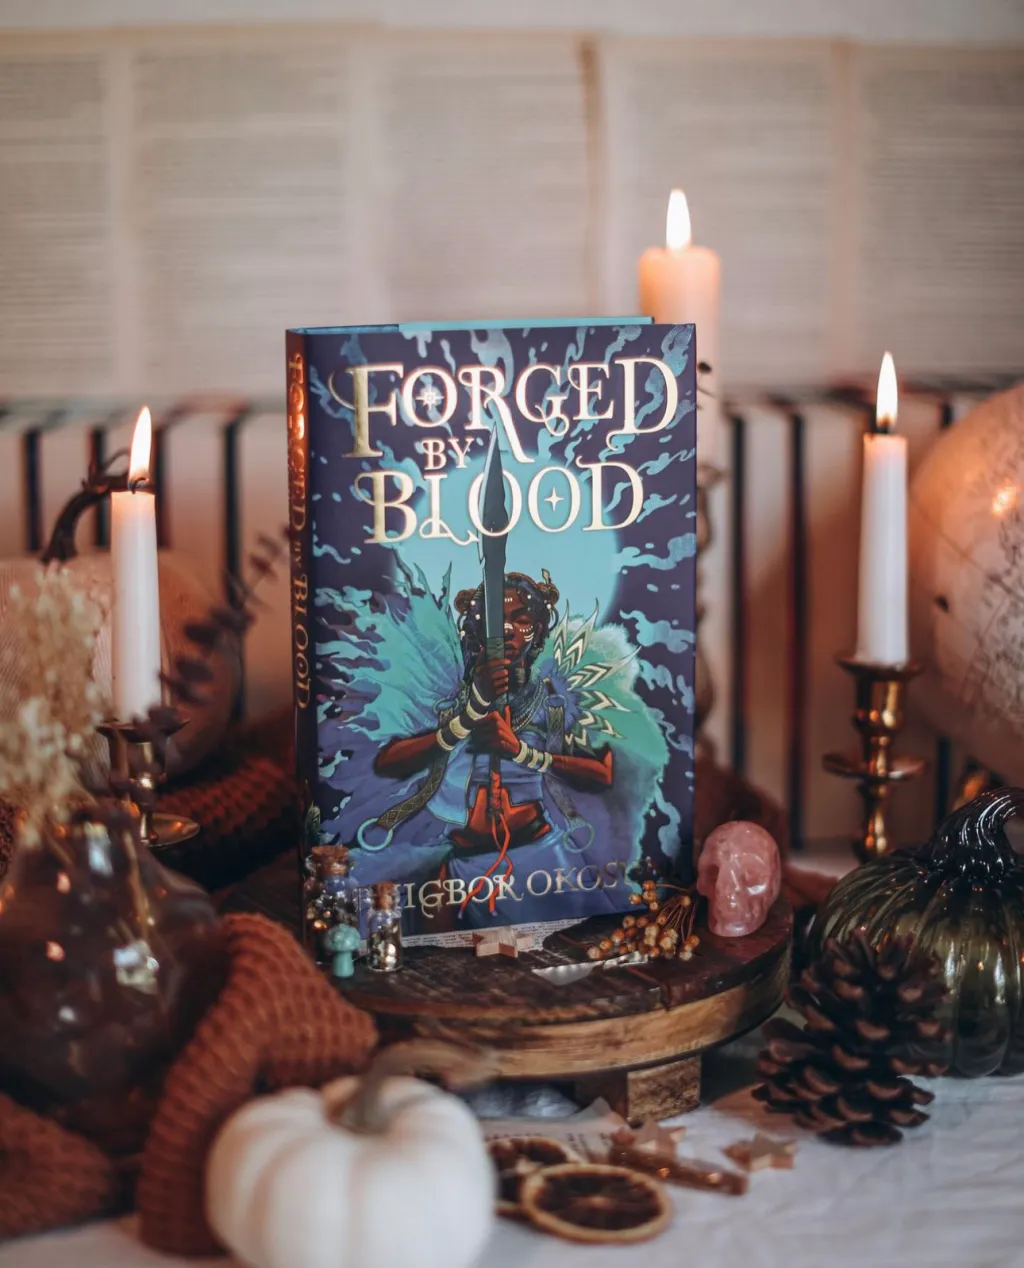 Forged by Blood Readalong Schedule